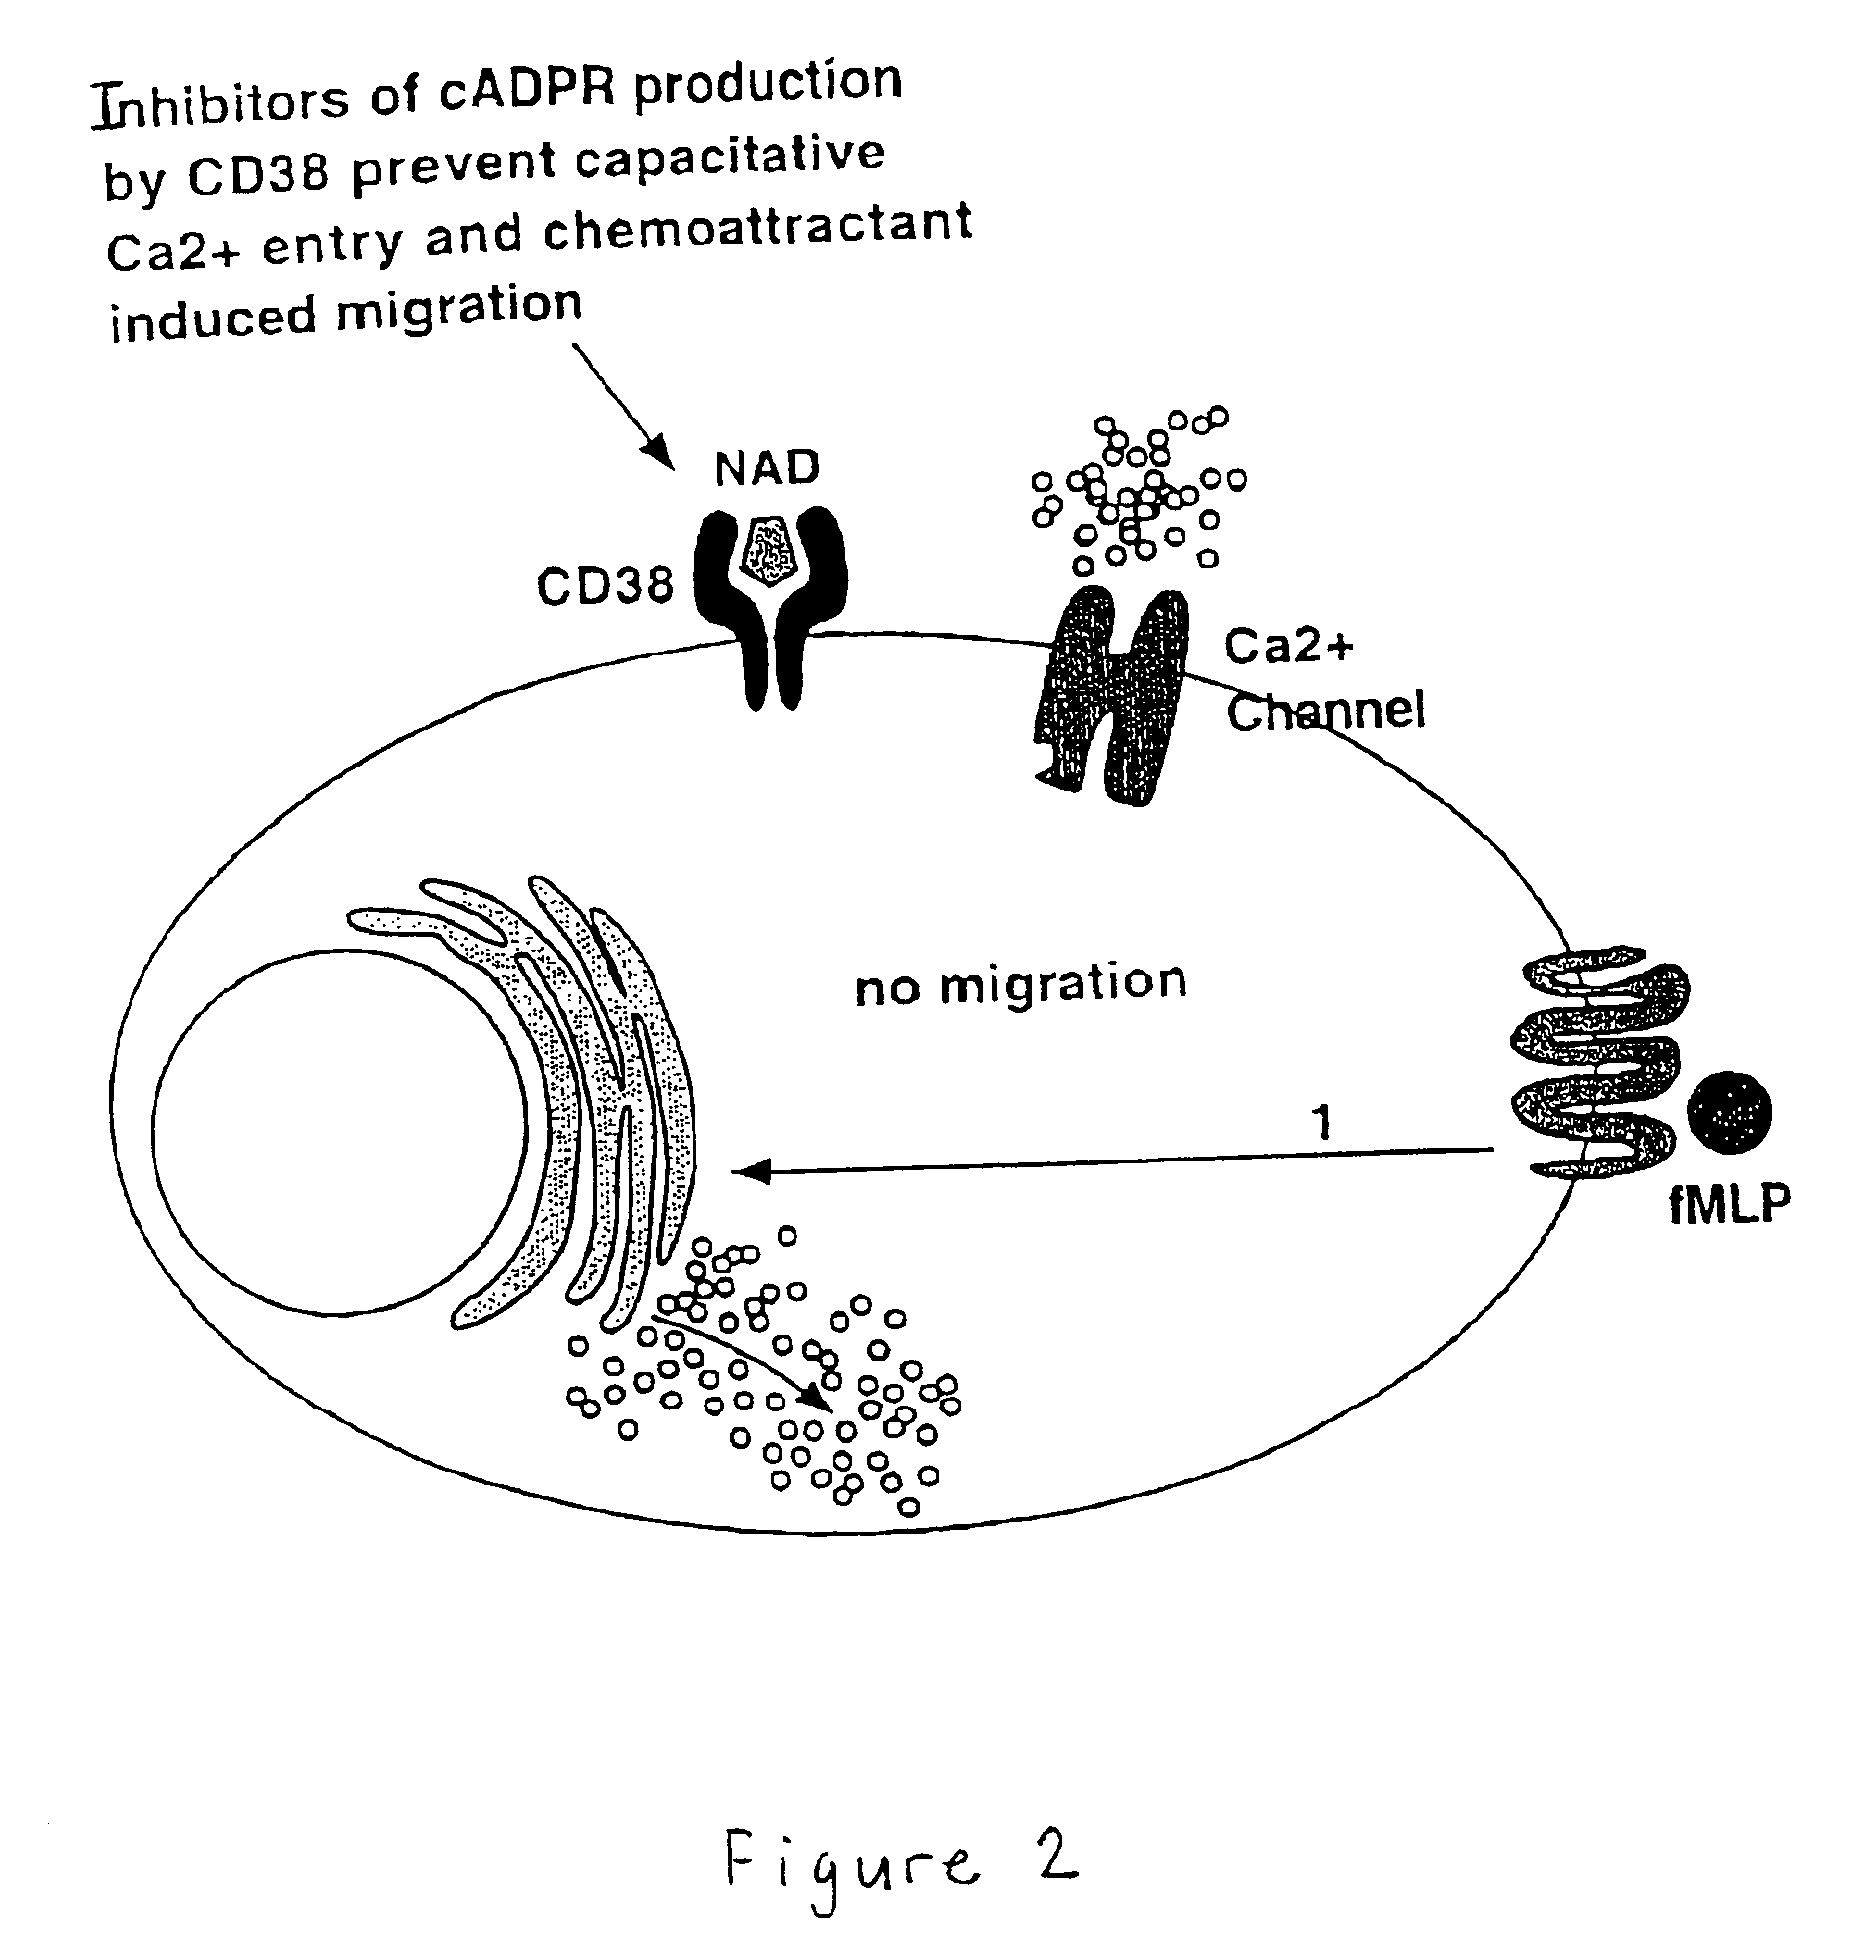 Methods for identifying compounds that inhibit CD38 activity